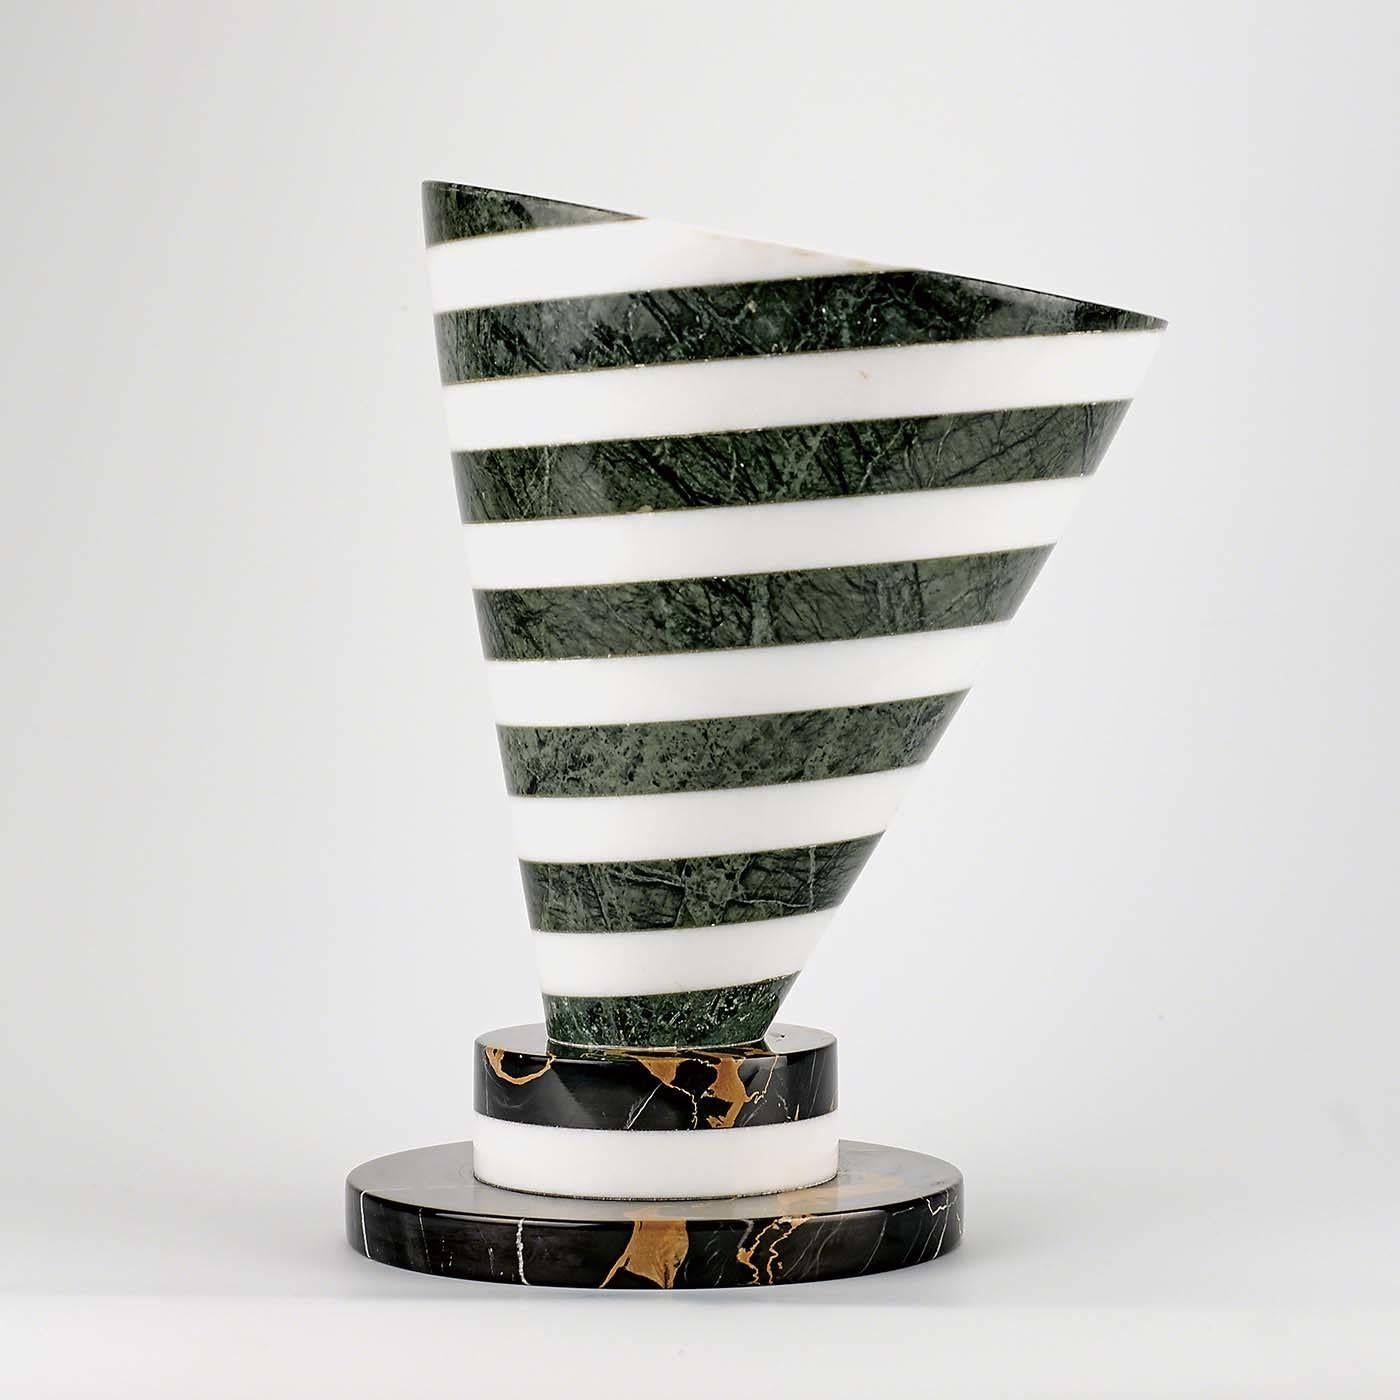 This centrepiece has an extroverted and contemporary silhouette. Two different marbles, white Carrara and green marble, compose the conical shape of the main element, creating an intriguing spiral design. The base is made of a large disc of black